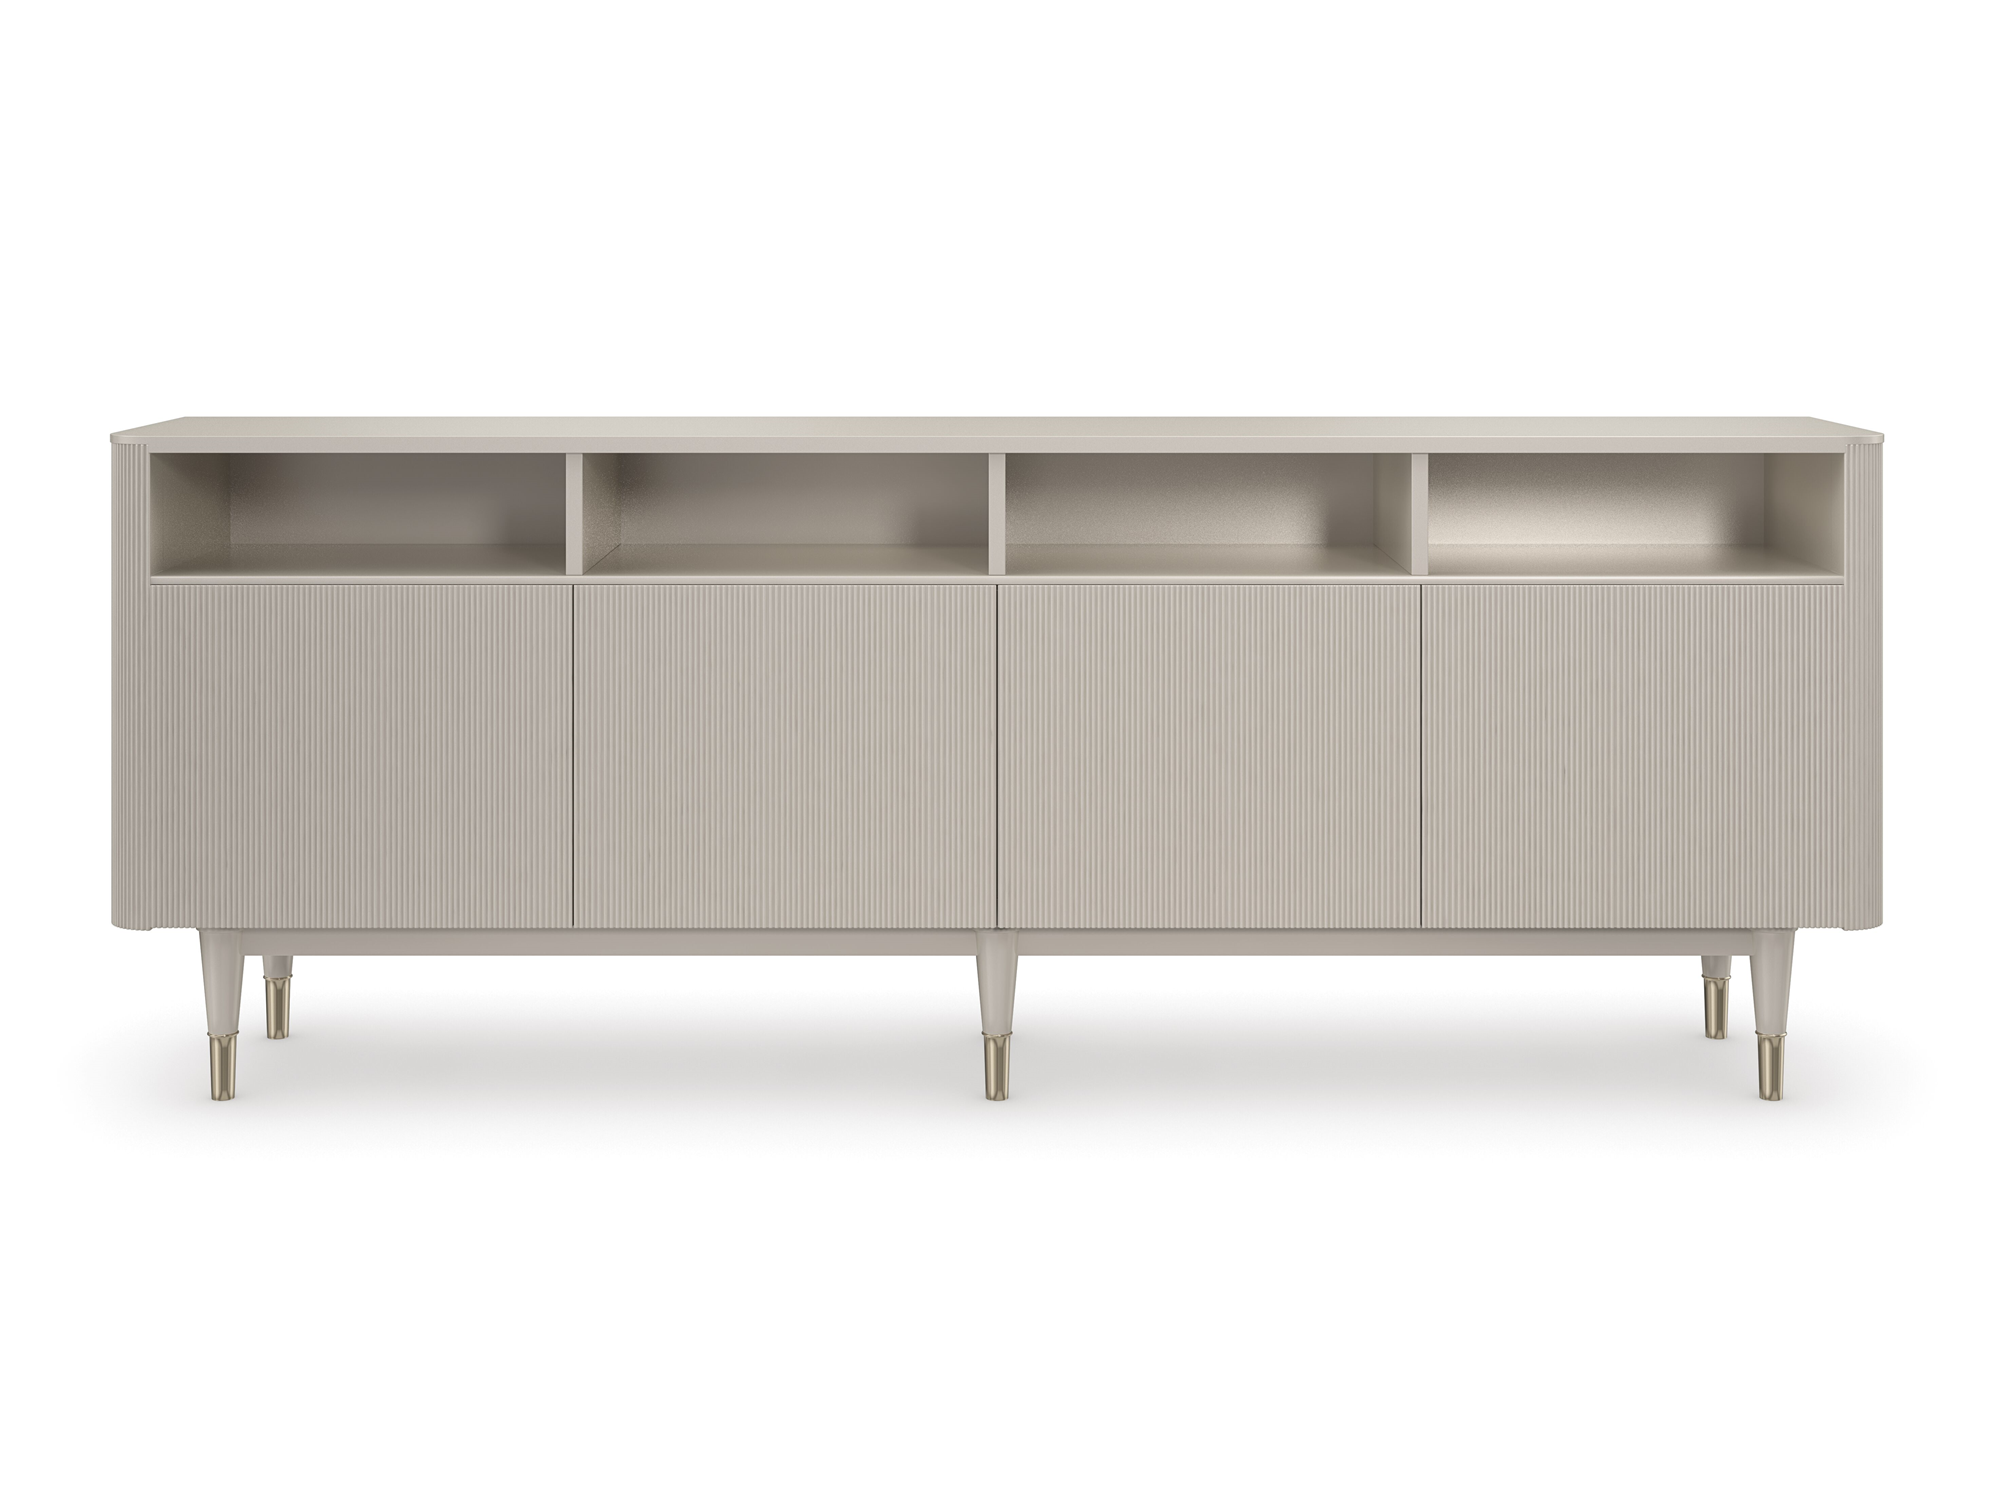 Babs Love Lines Cabinet - Euro Living Furniture